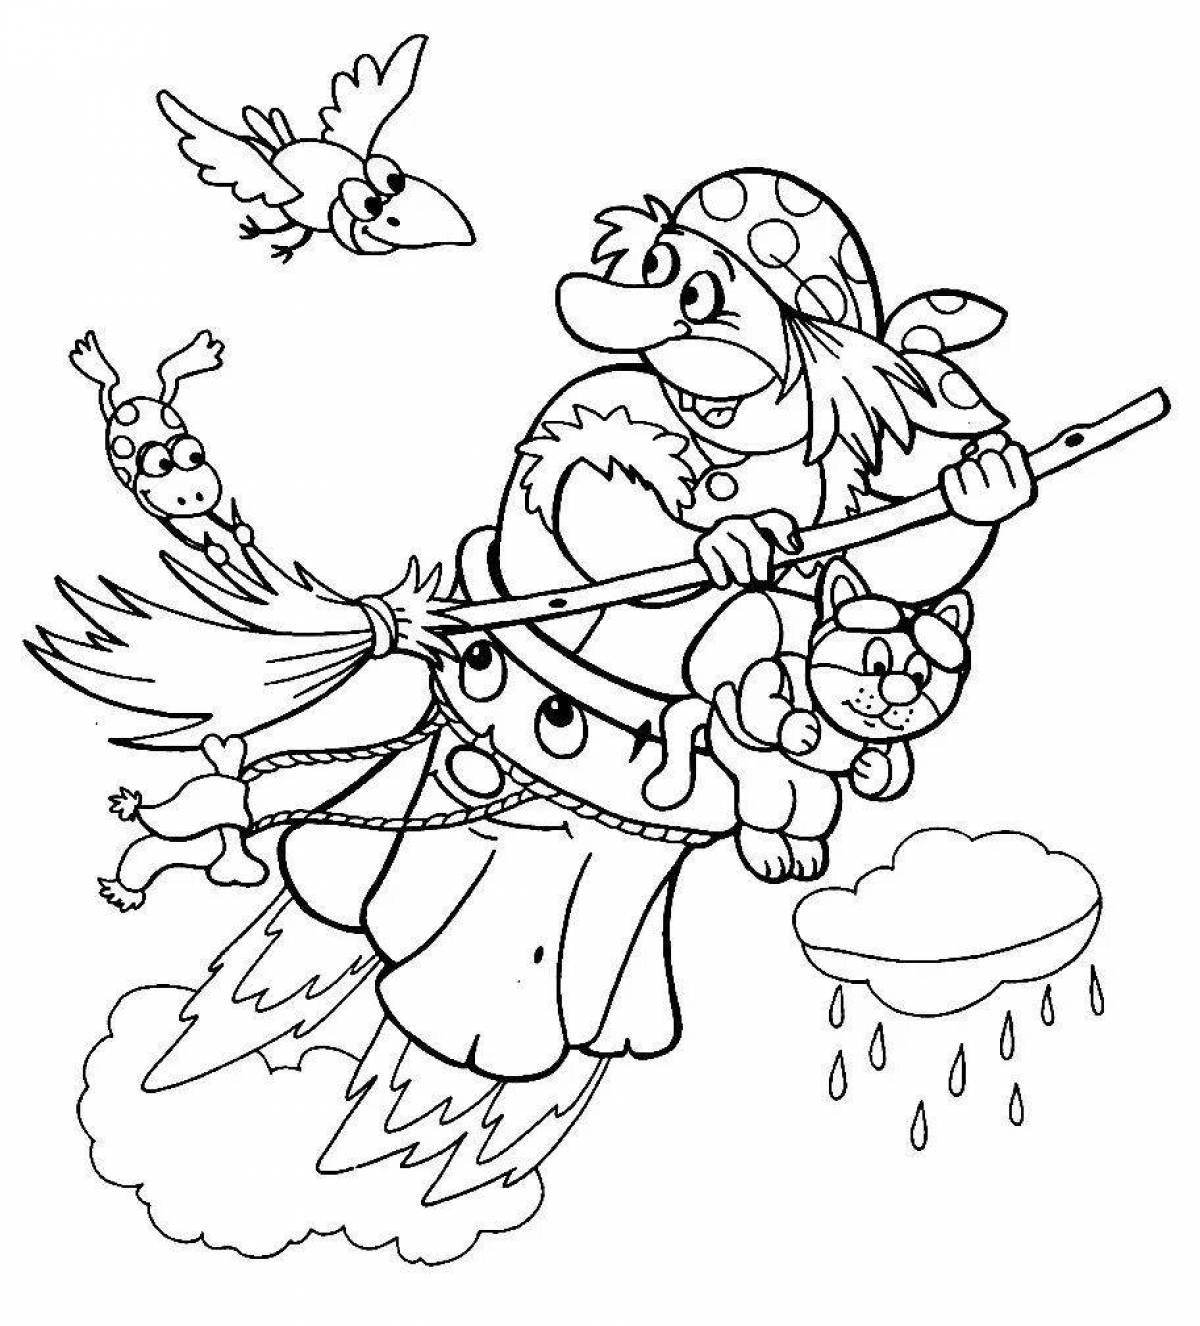 Gorgeous baba yaga coloring book for babies